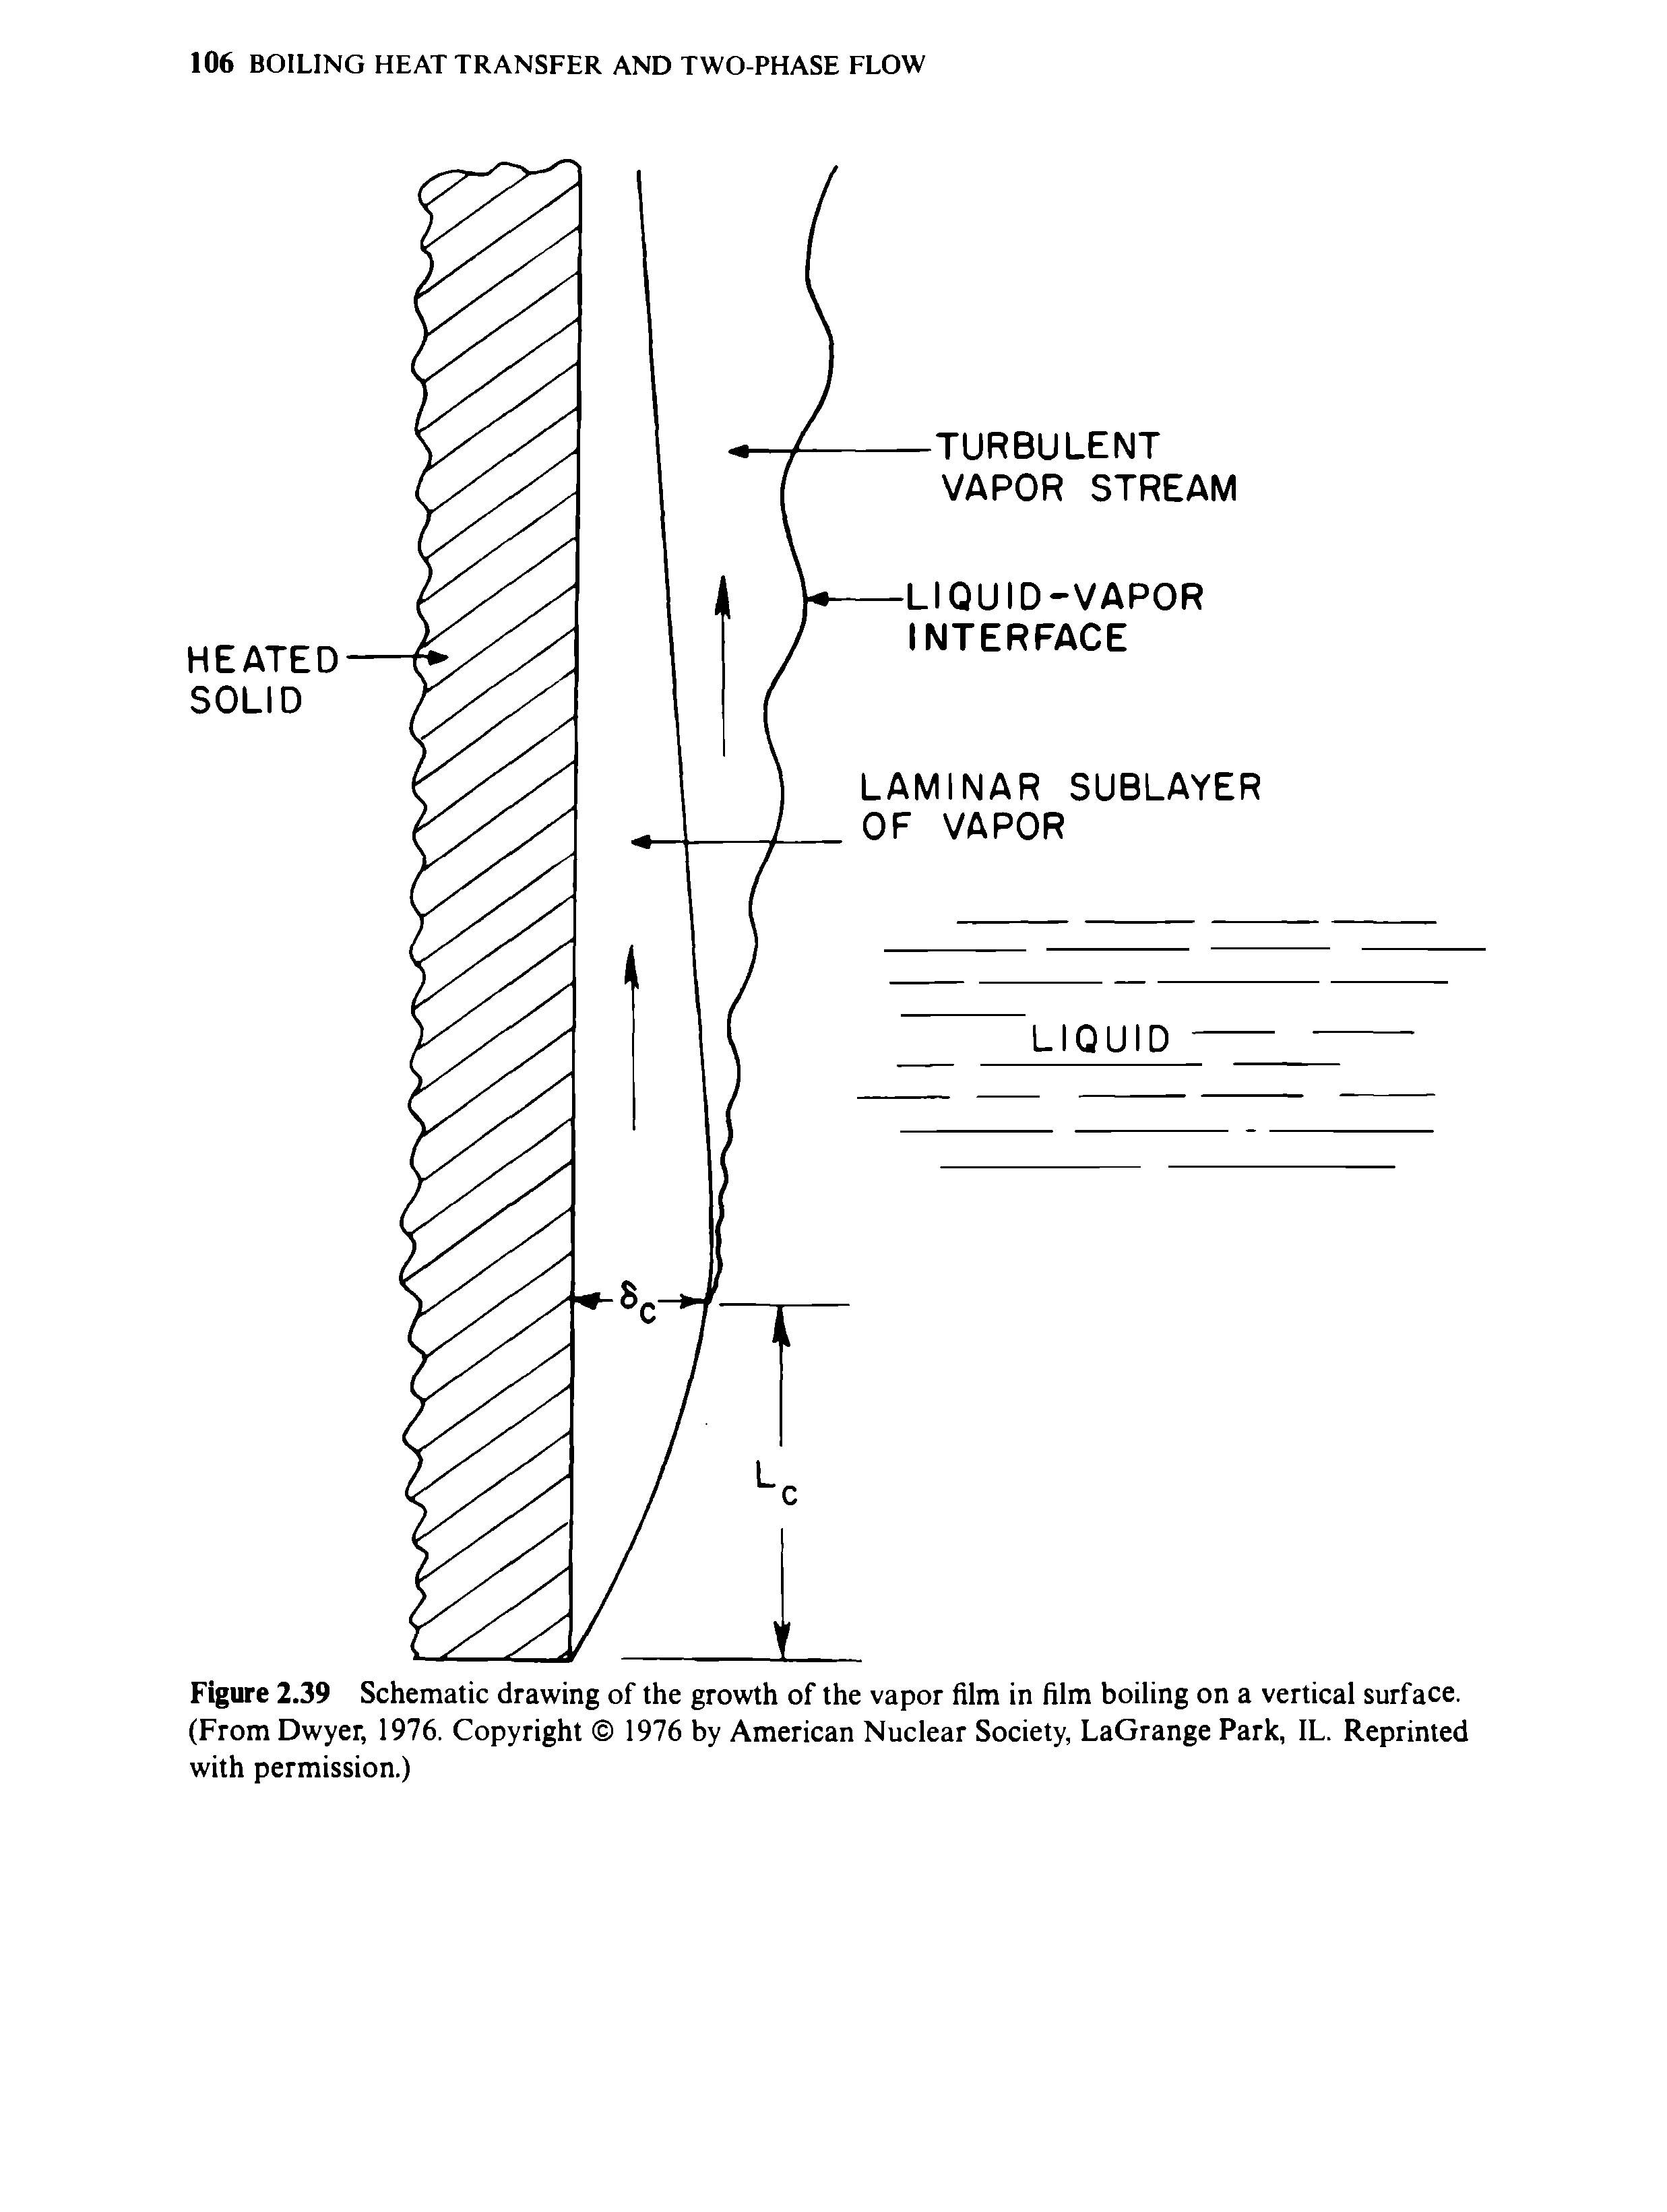 Figure 2.39 Schematic drawing of the growth of the vapor film in film boiling on a vertical surface. (From Dwyer, 1976. Copyright 1976 by American Nuclear Society, LaGrange Park, IL. Reprinted with permission.)...